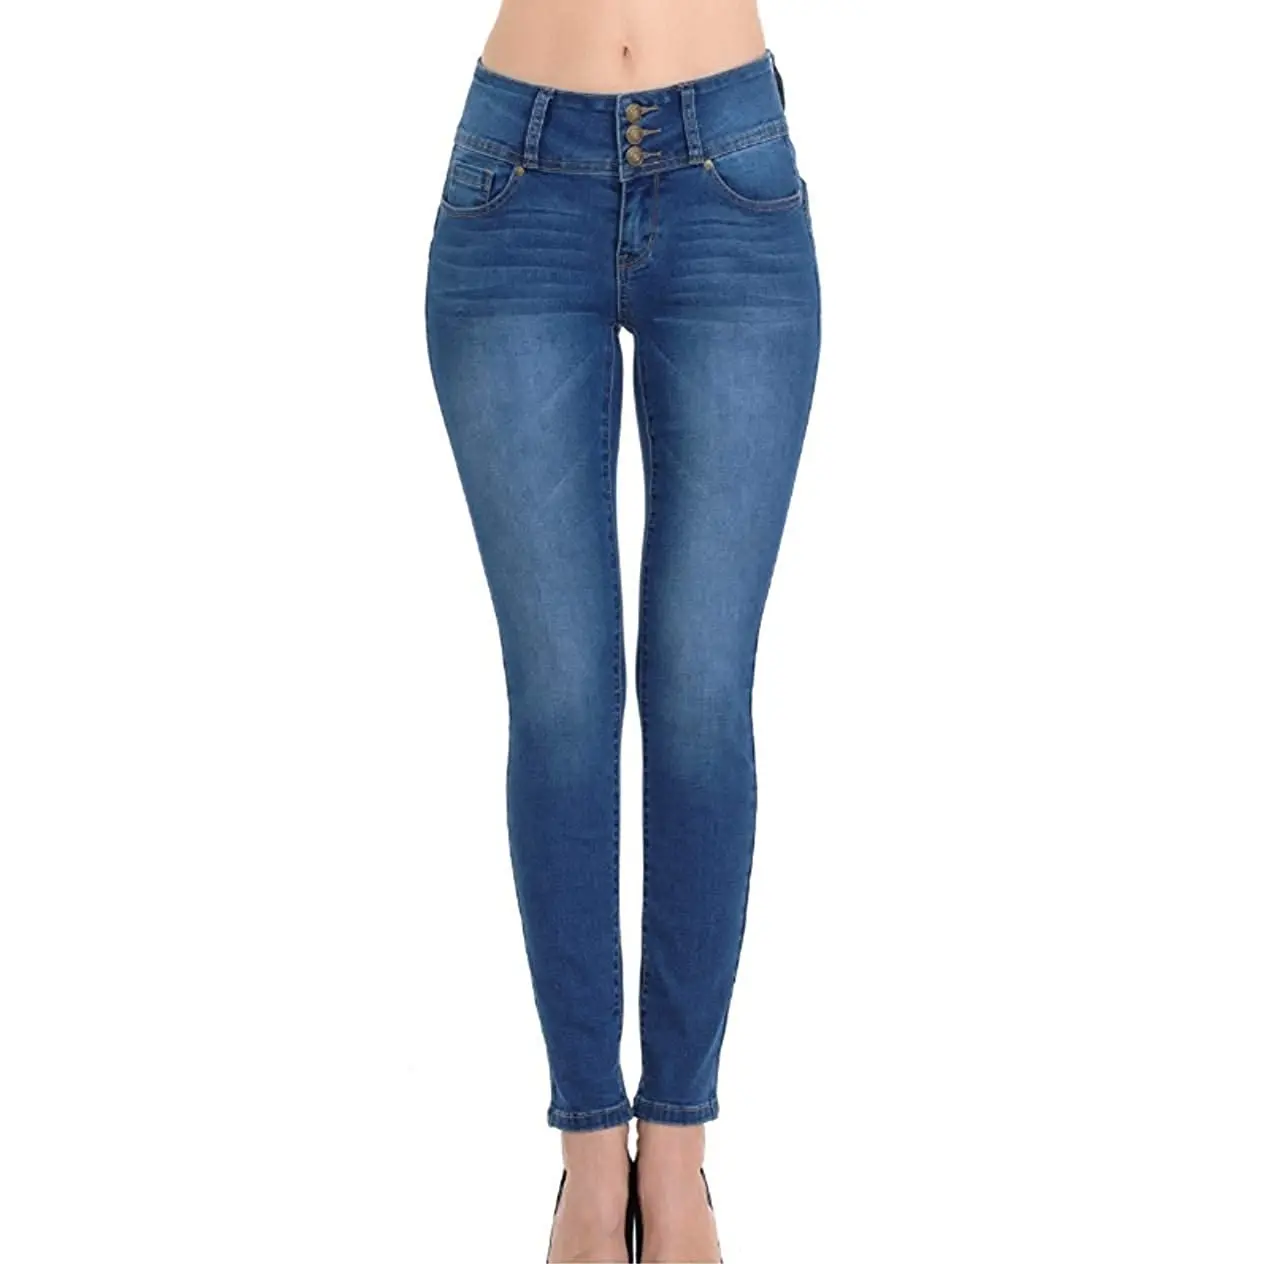 Custom Women Stretch Jeans Mid Waist Solid Color Manufacturer Provides Women's Skinny Denim Jeans Pants From Bangladesh